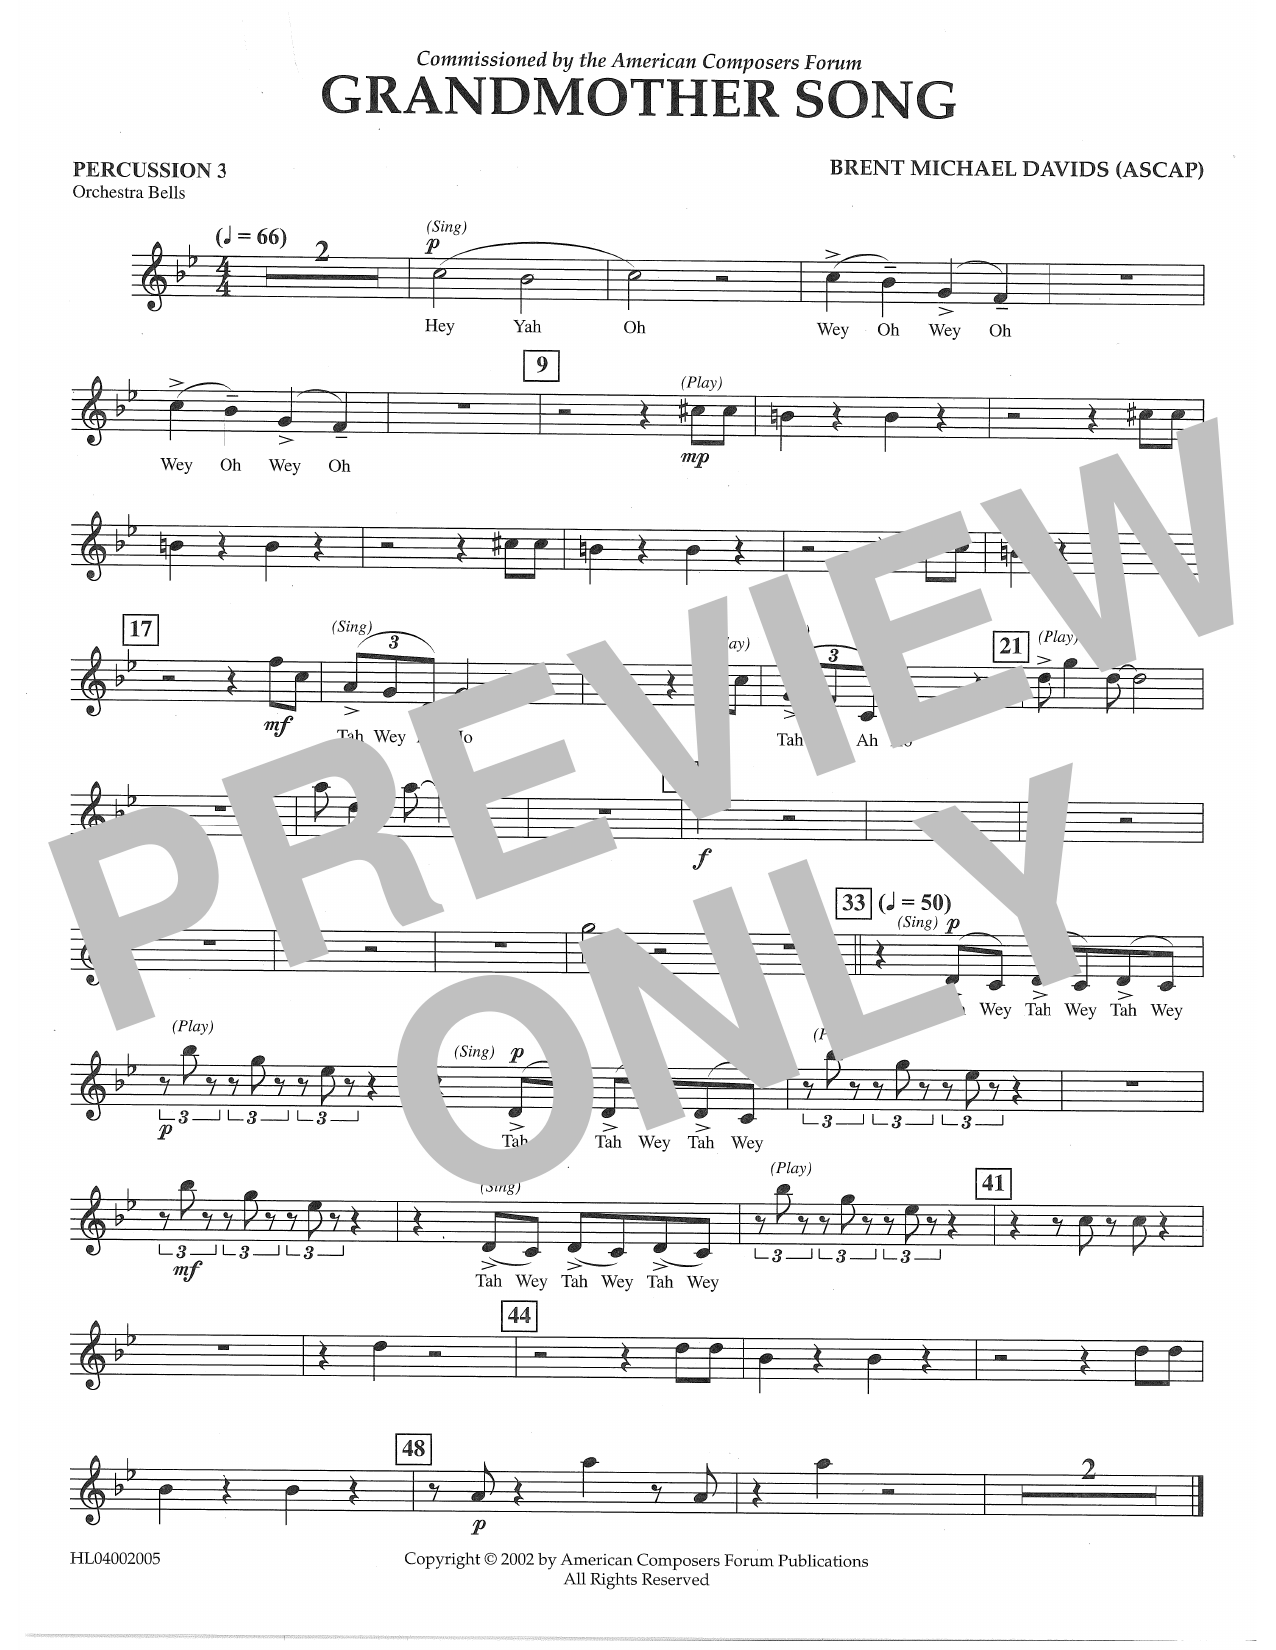 Download Brent Michael Davids Grandmother Song - Percussion 3 Sheet Music